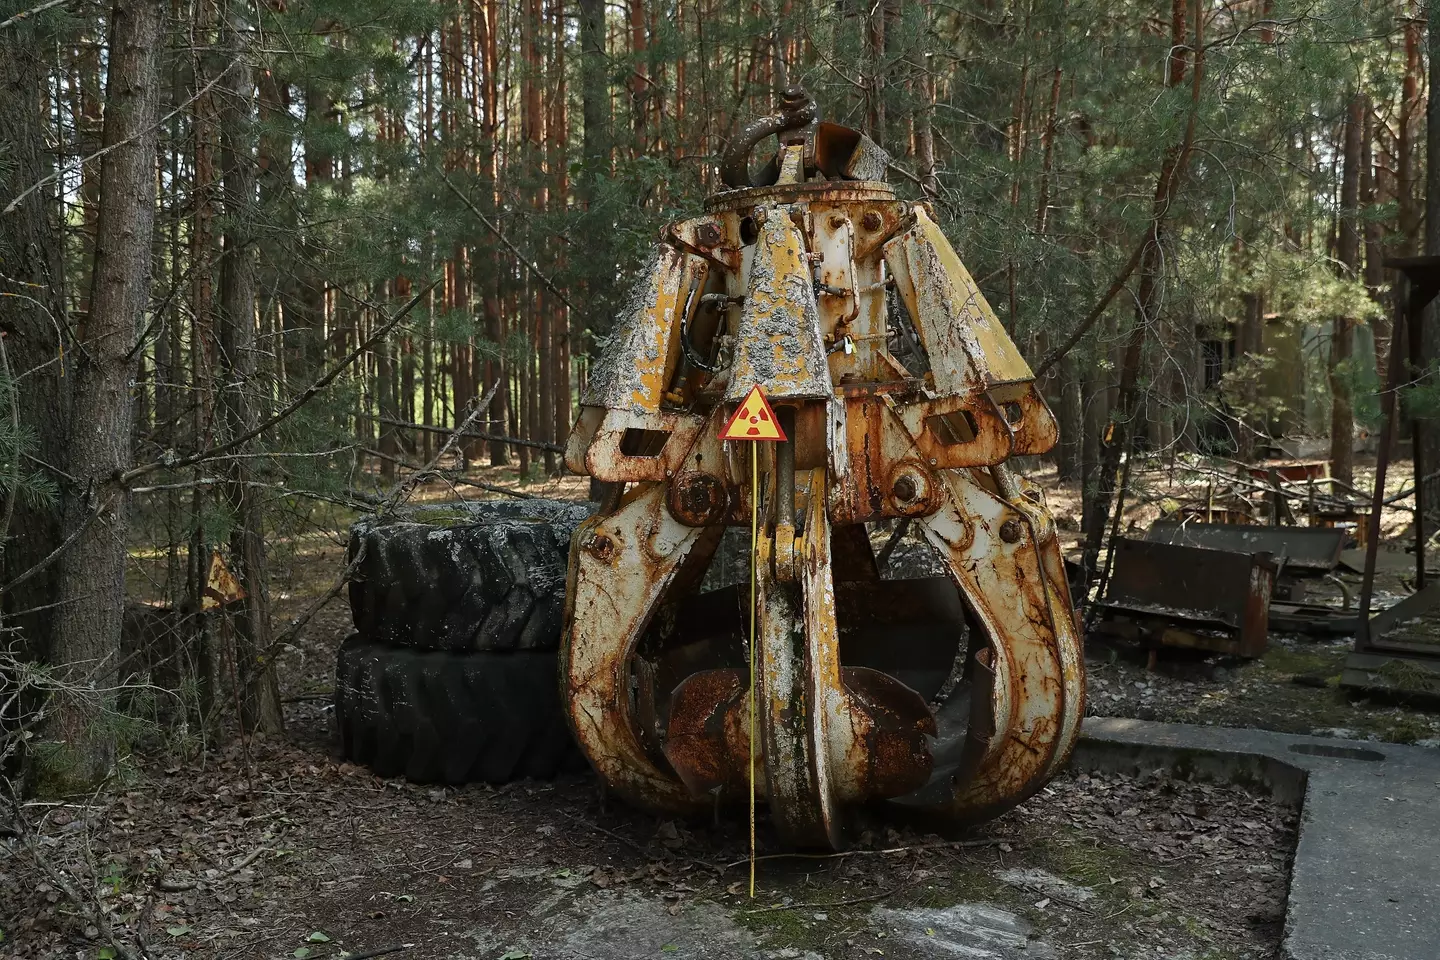 This is the claw used to move radioactive debris in the aftermath of the Chernobyl disaster. (Sean Gallup/Getty Images)